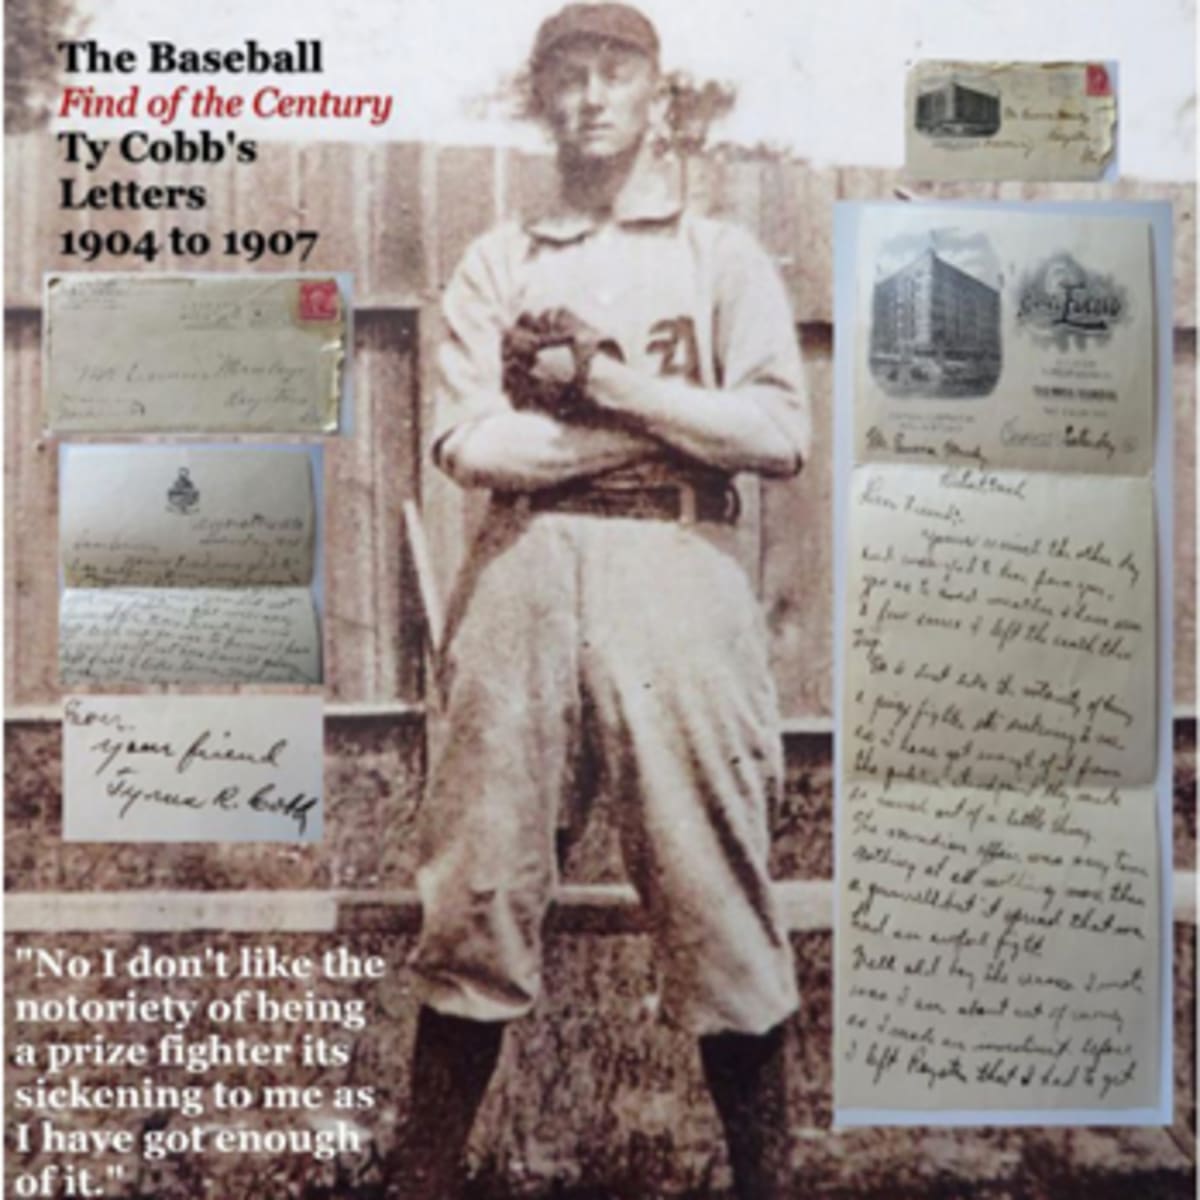 April 26, 1904: Ty Cobb plays first pro game in Augusta